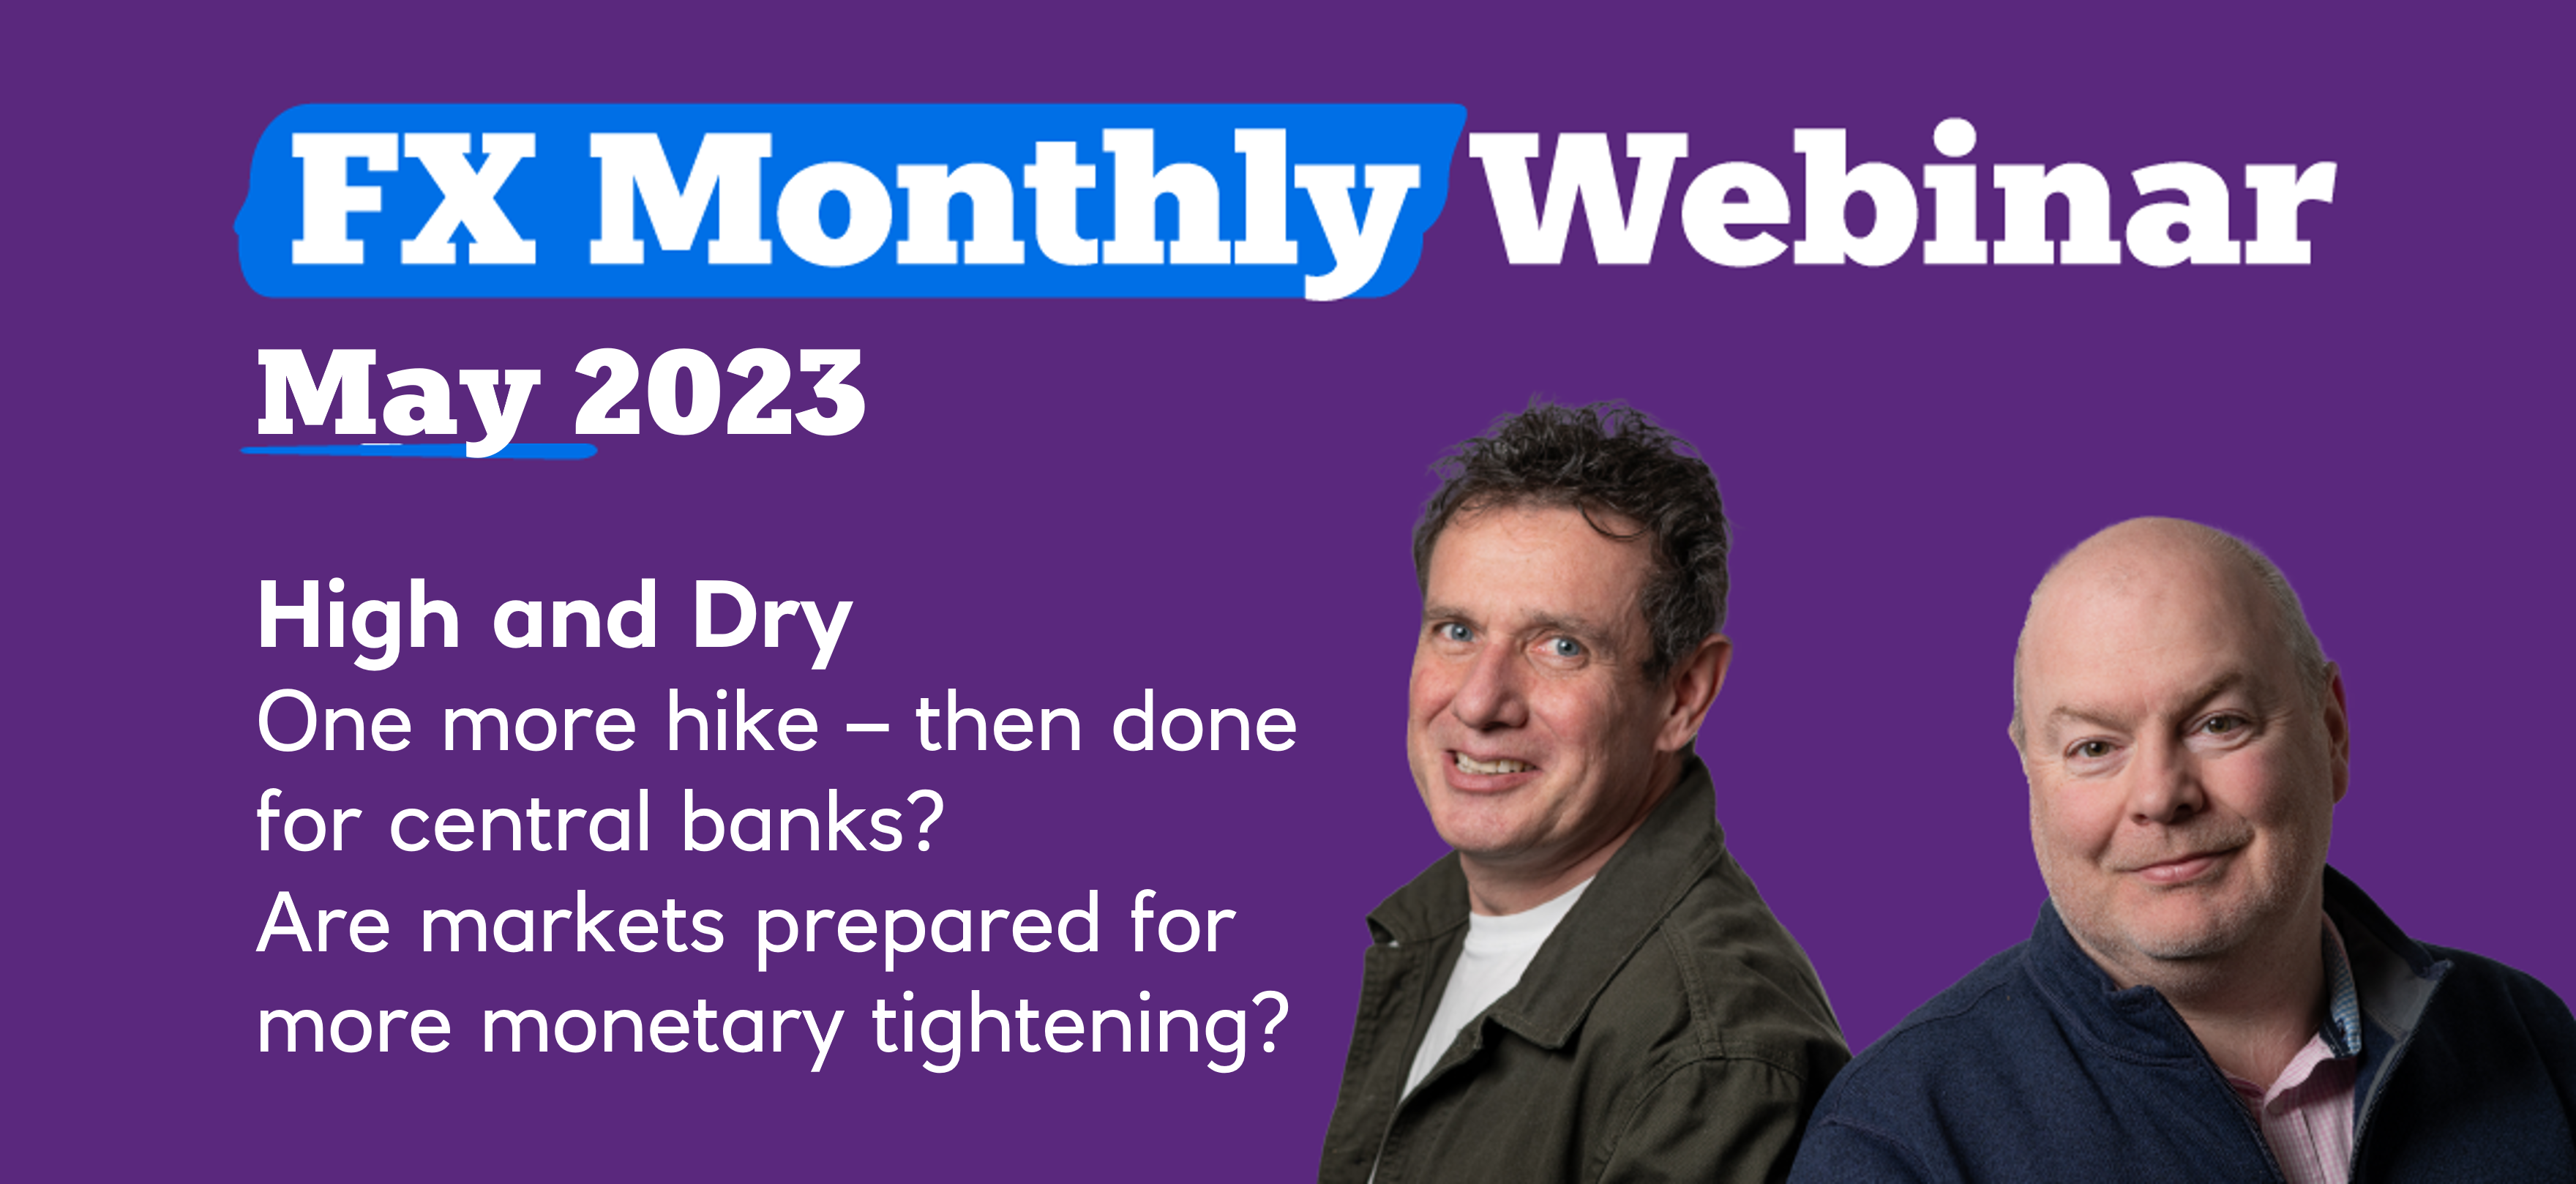 FX Monthly Webinar May 2023